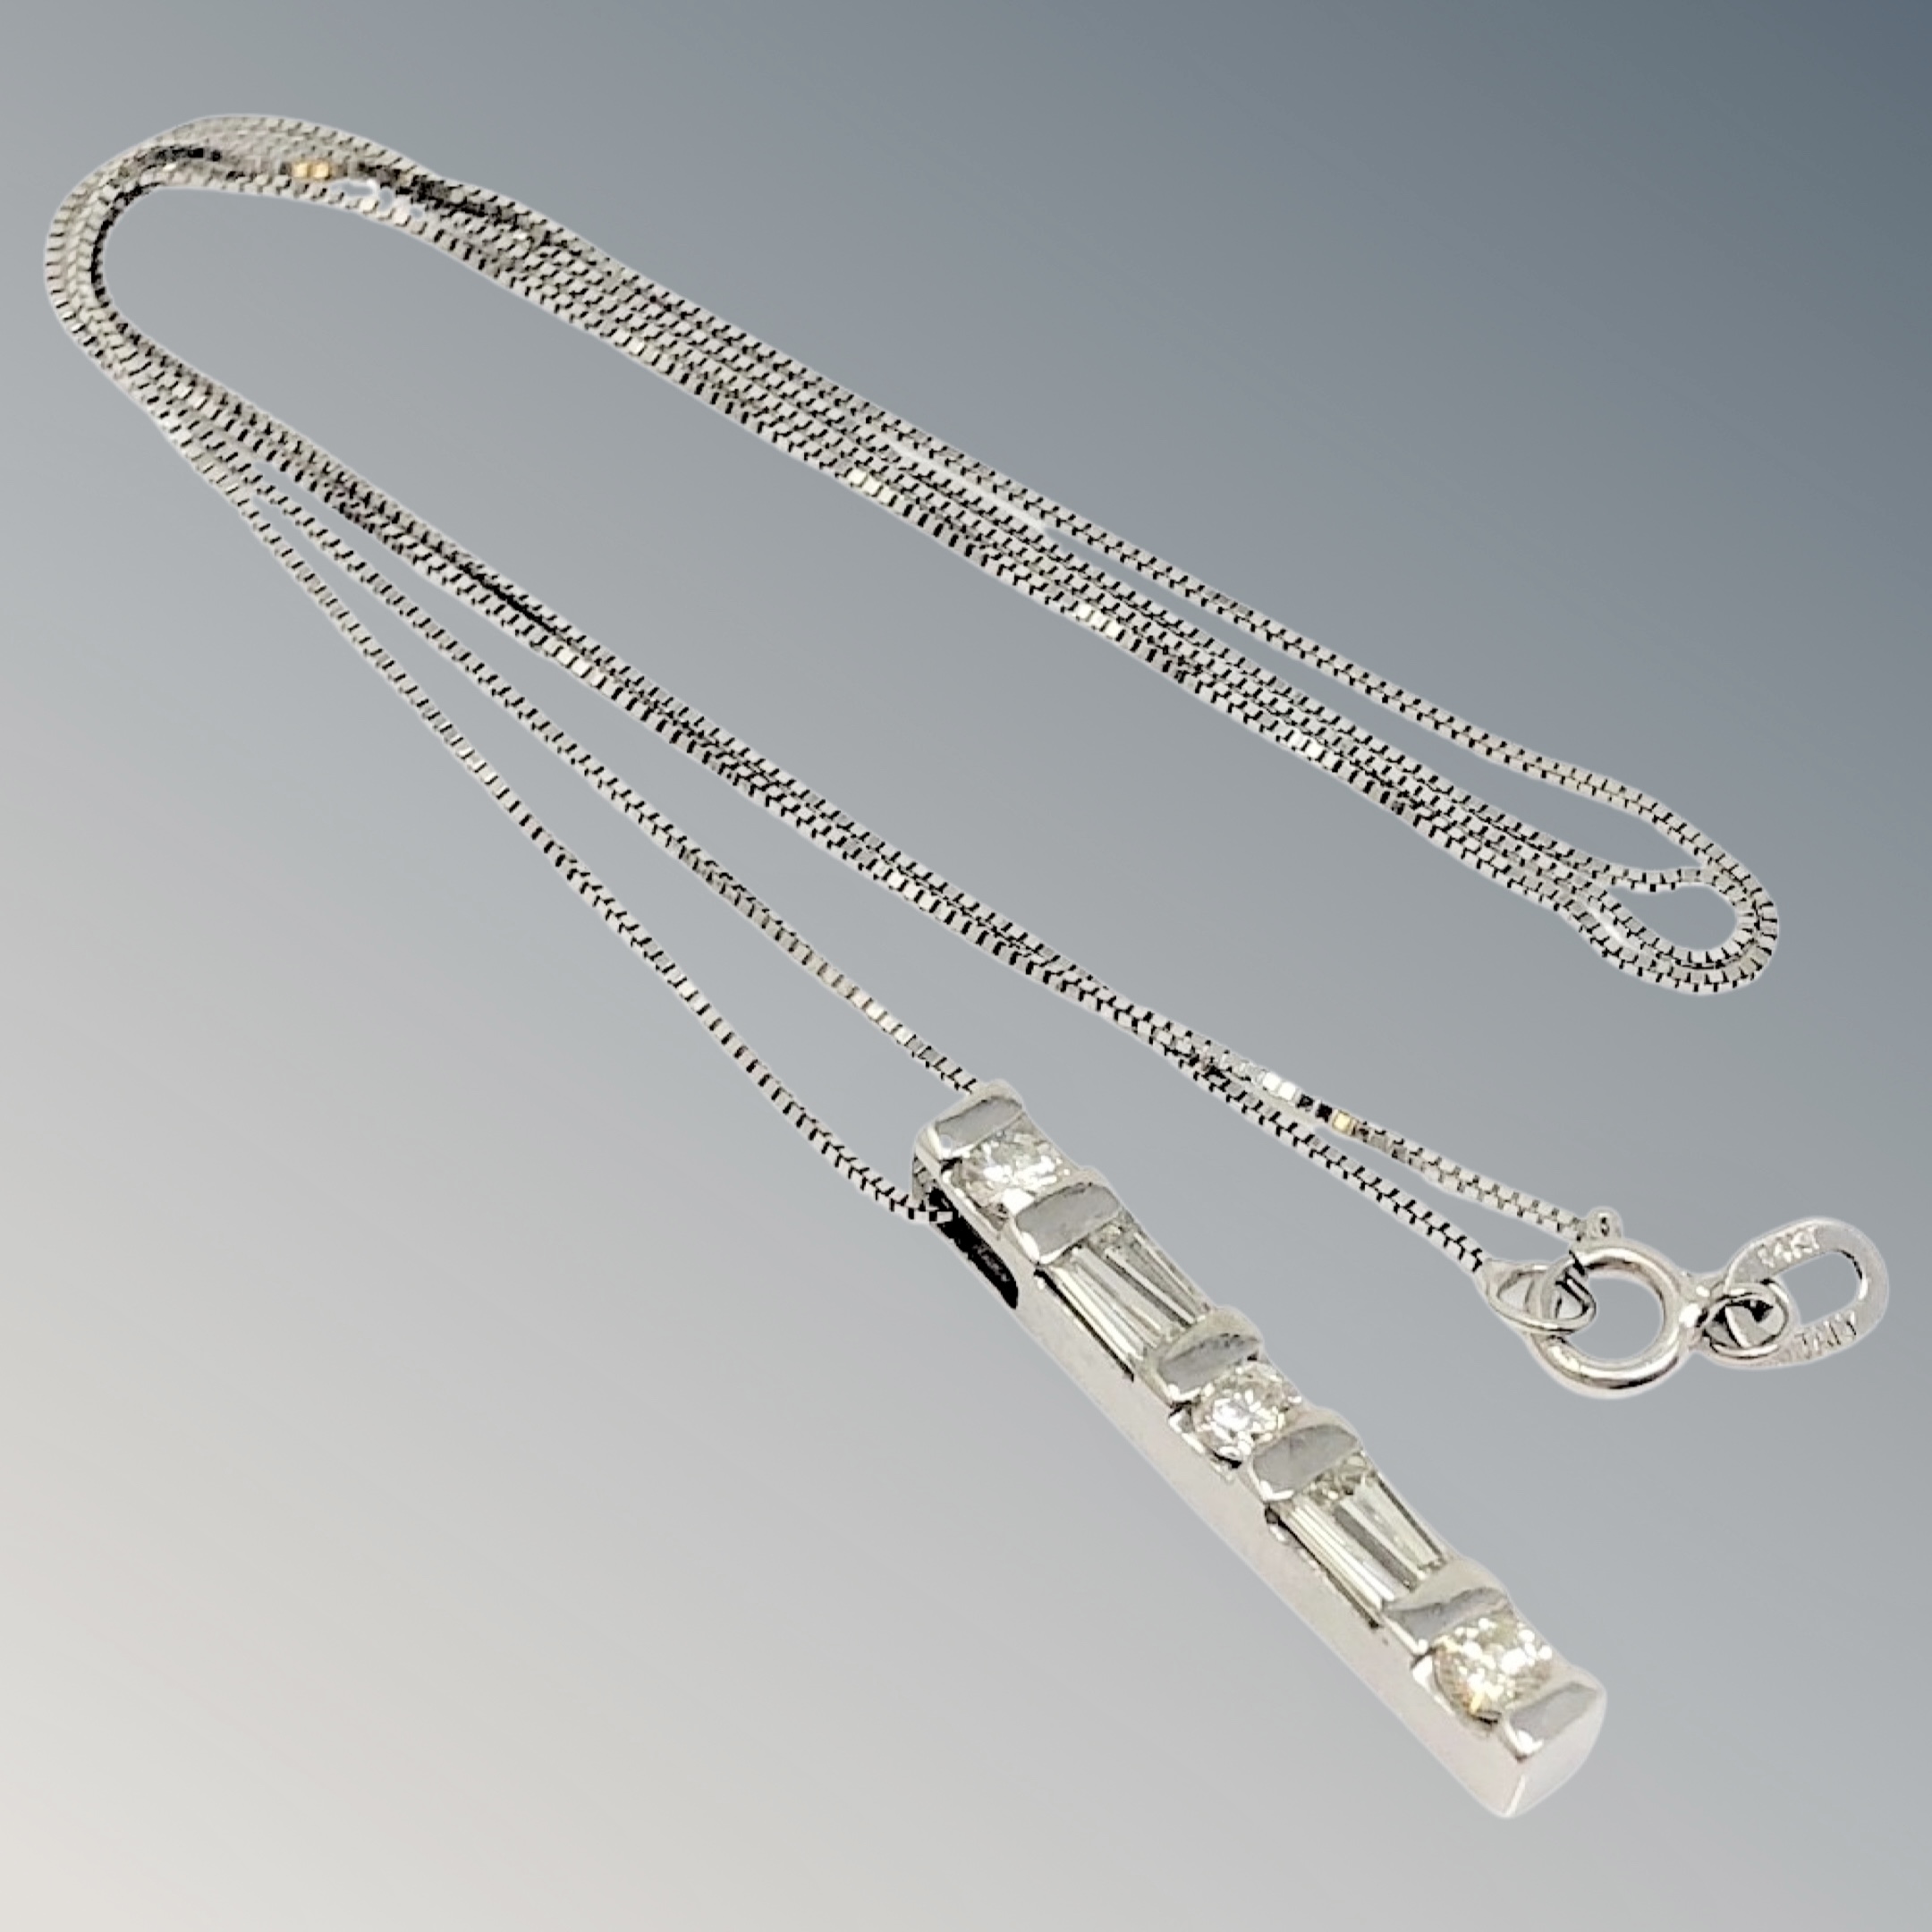 A 14ct white gold pendant and chain set with round and tapered diamonds, approx. 0.